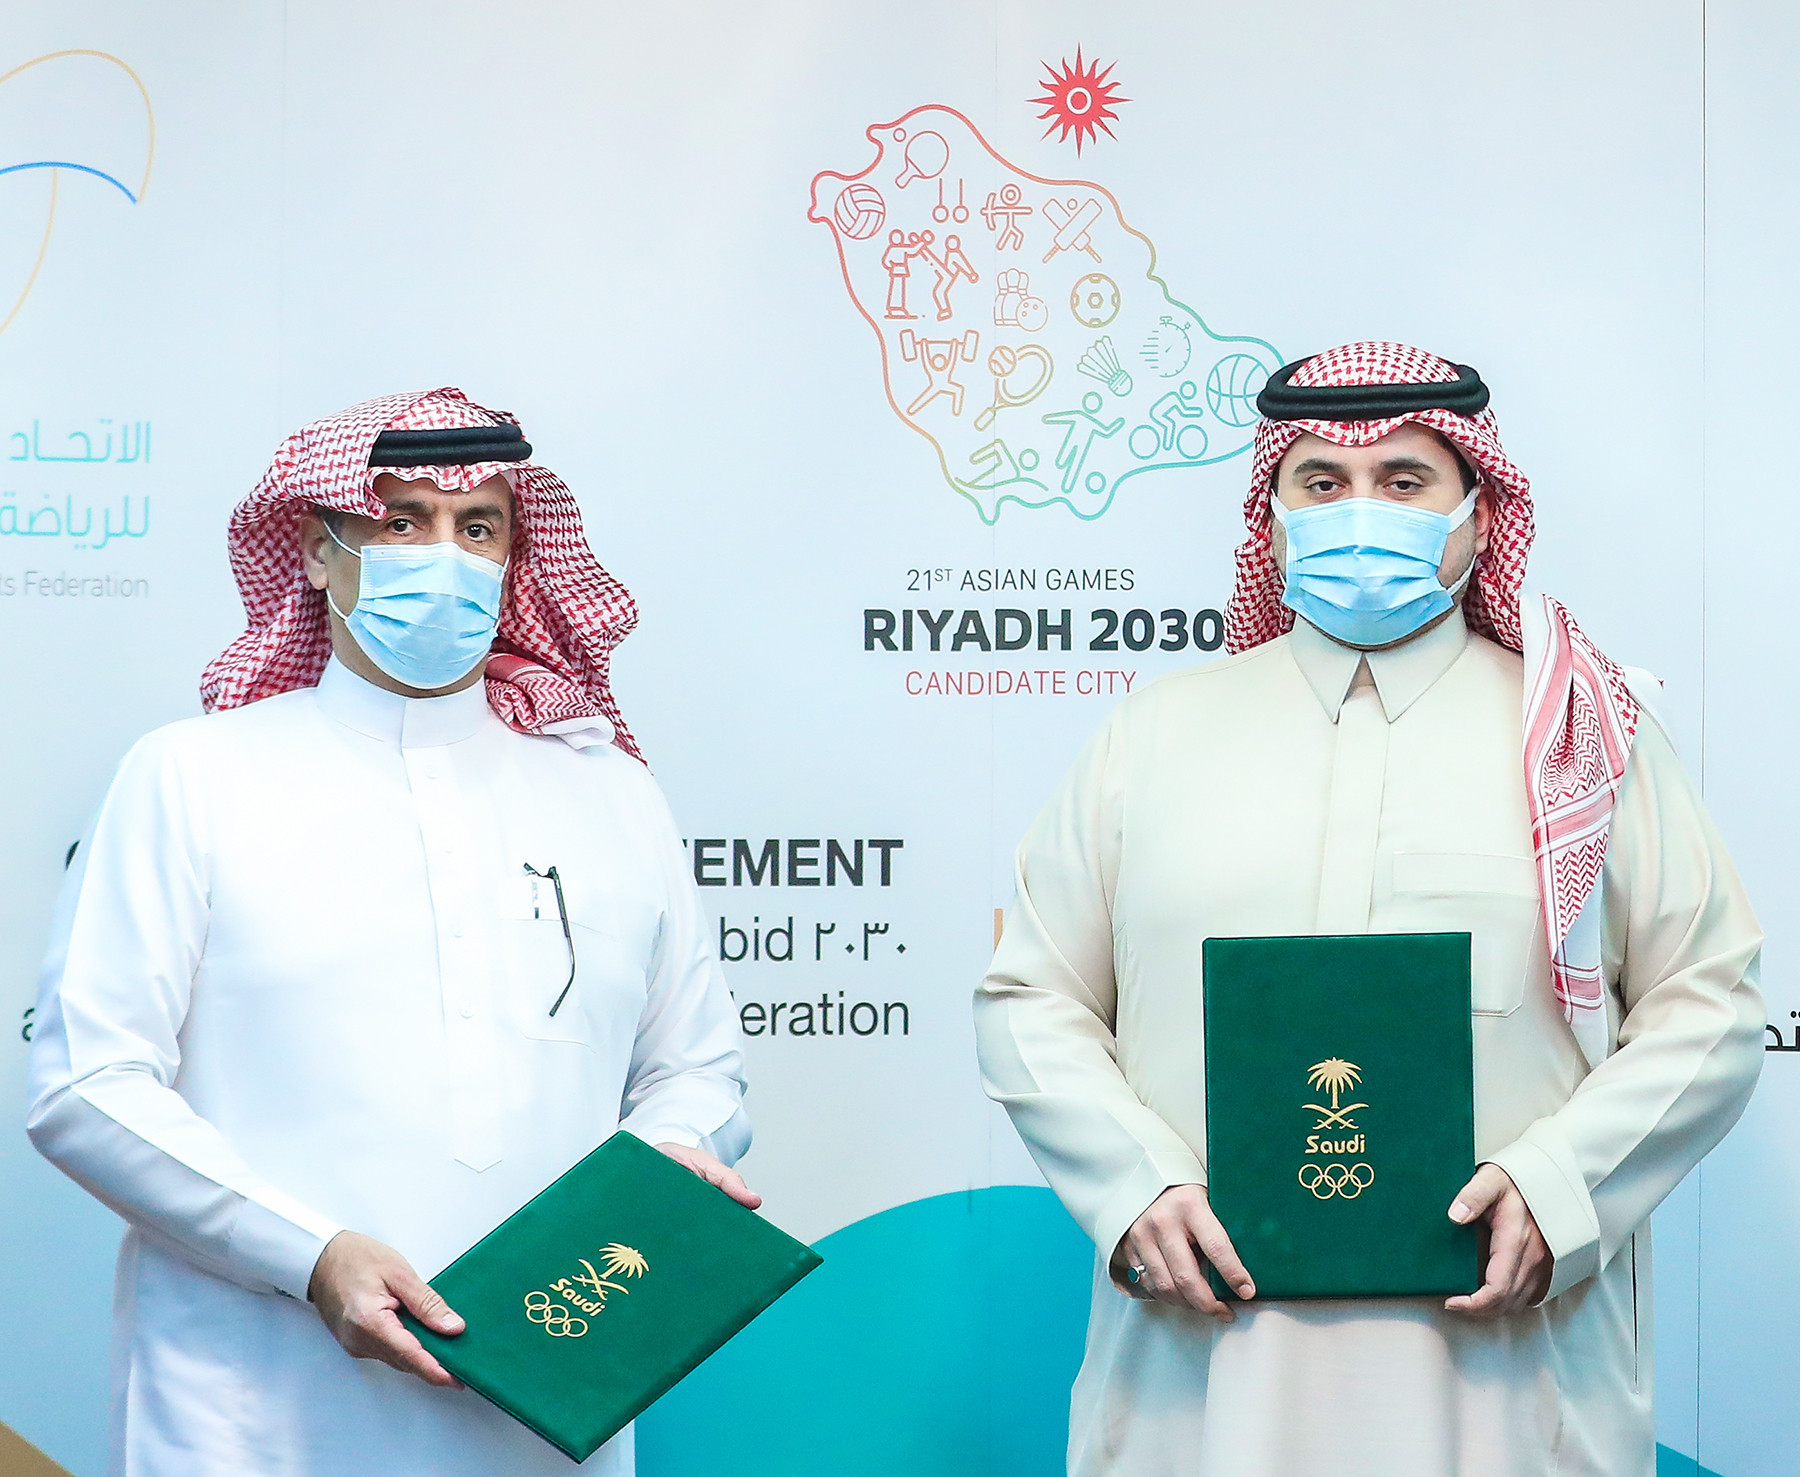 The launch of the initiative is part of an MoU signed by Riyadh 2030, the SAOC and the Saudi Federation of School Sports ©Riyadh 2030